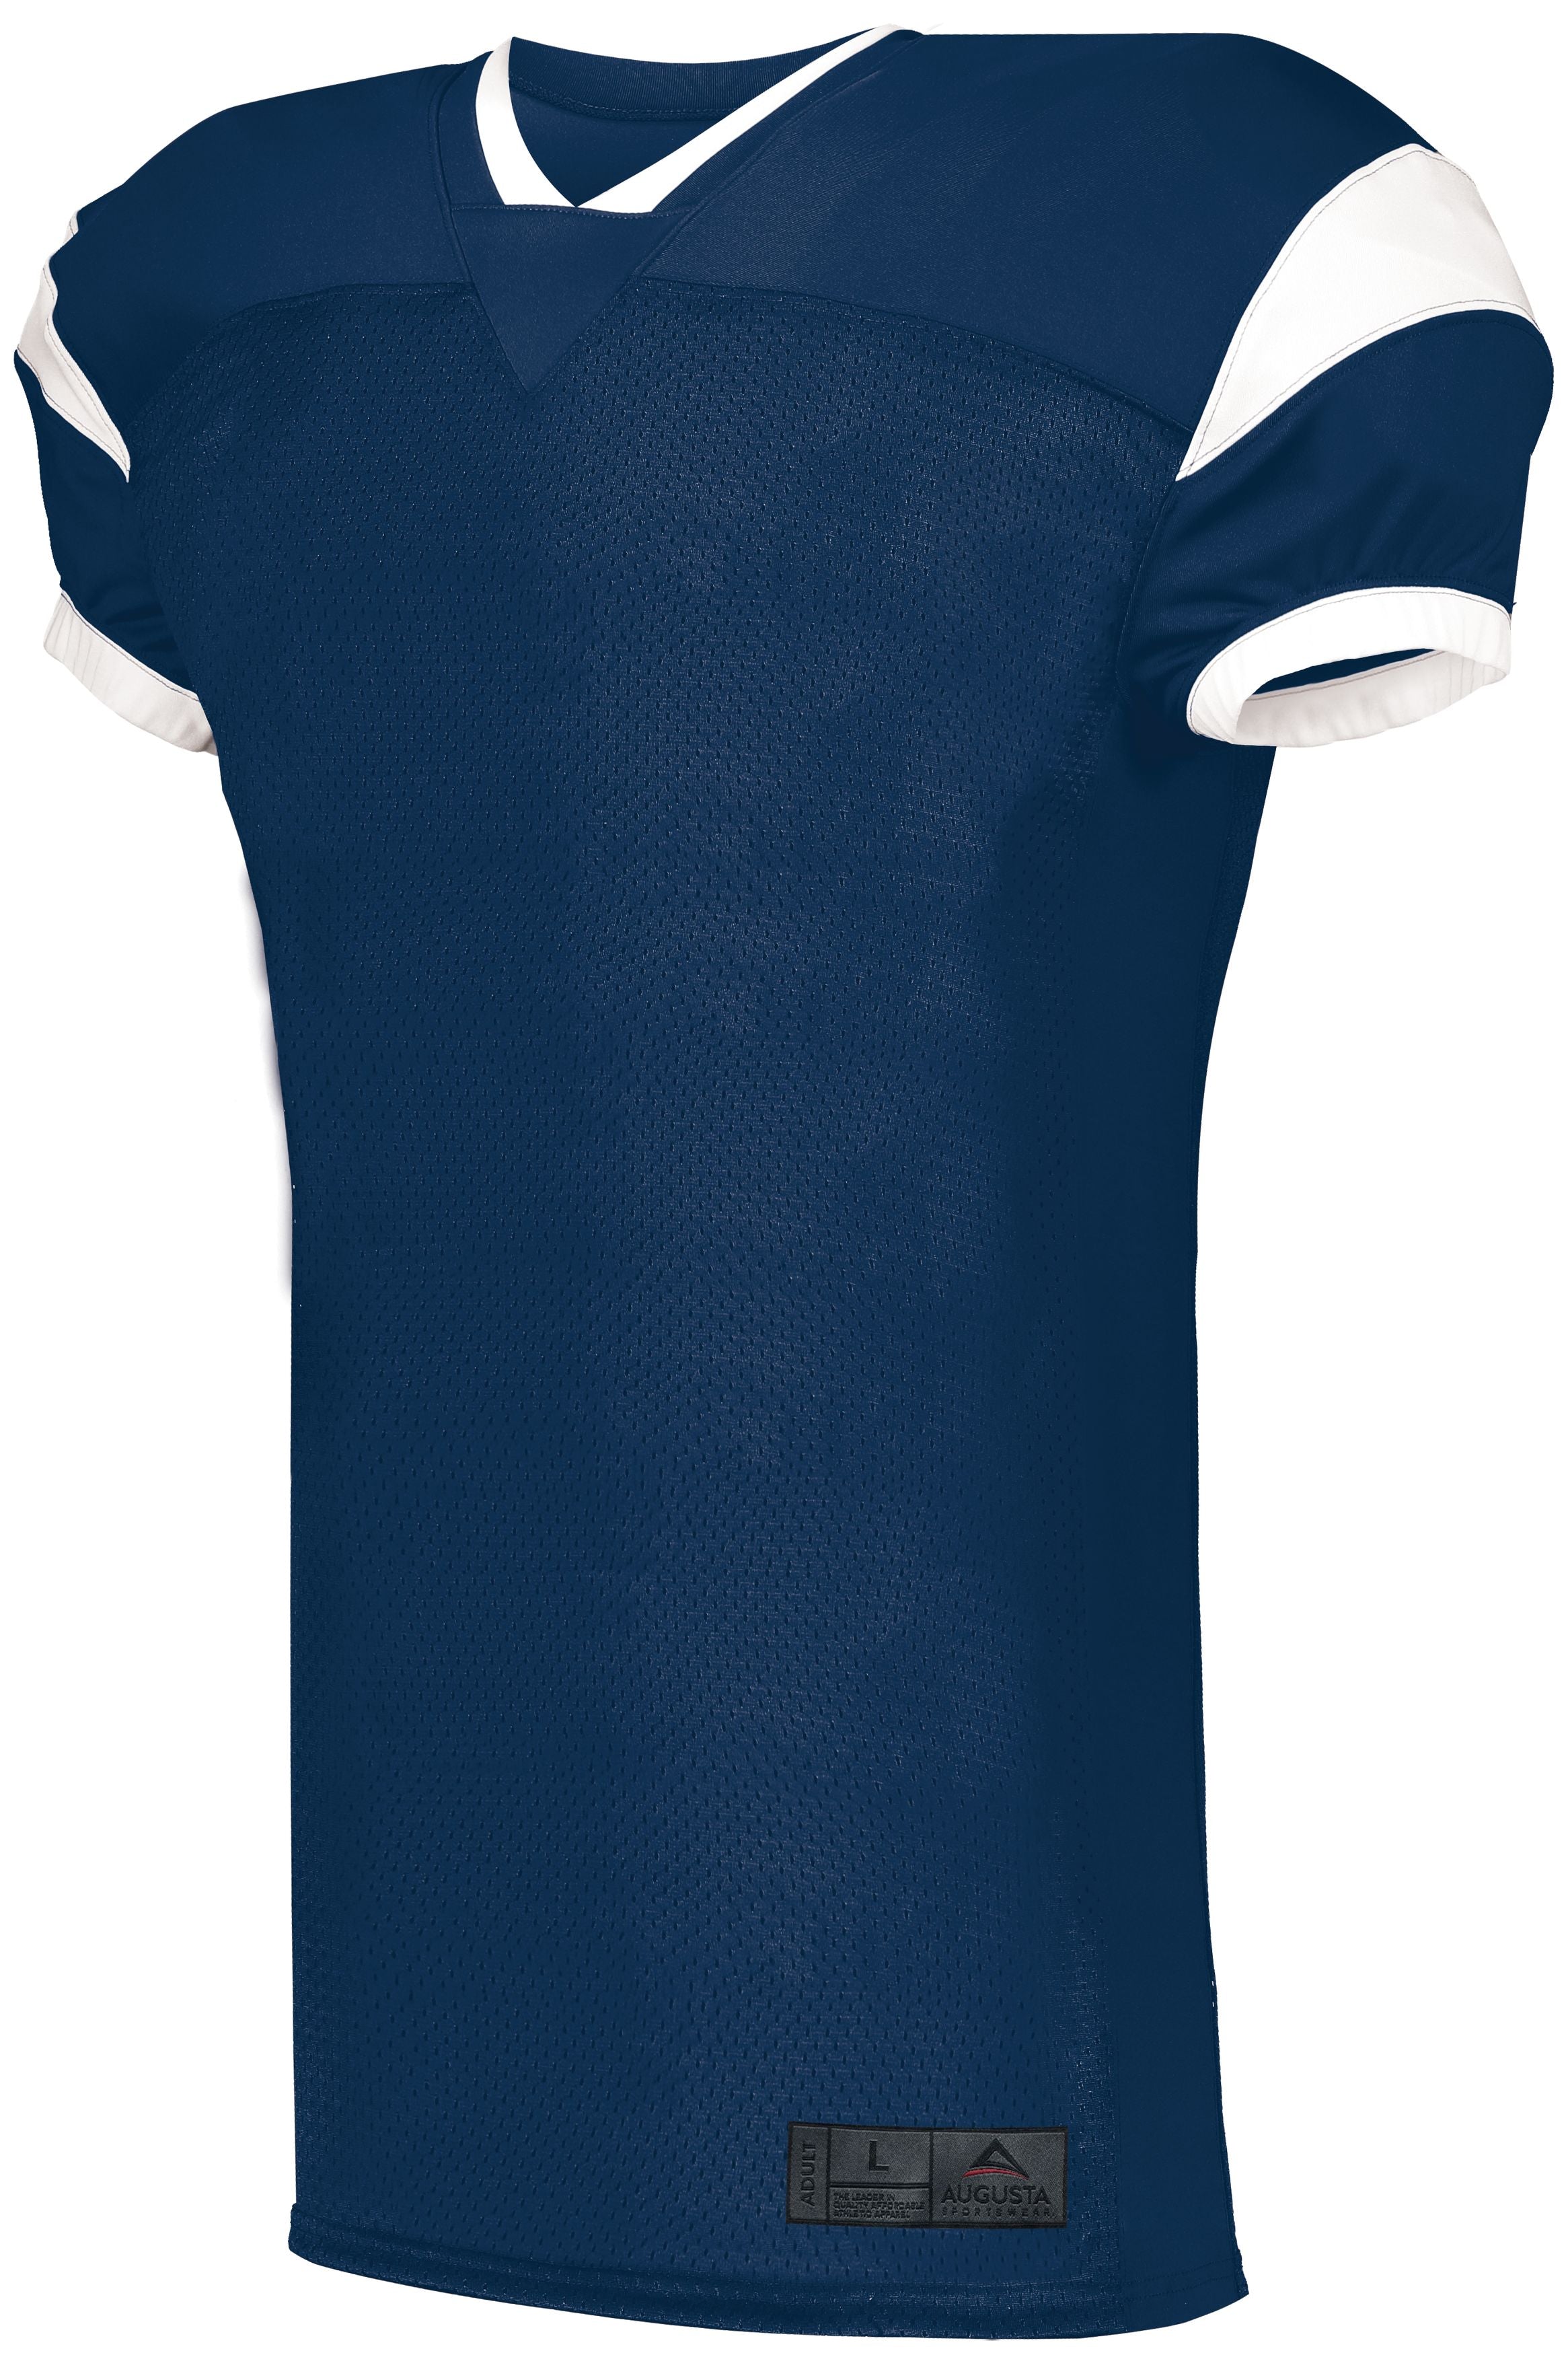 Augusta Sportswear Youth Slant Football Jersey in Navy/White  -Part of the Youth, Youth-Jersey, Augusta-Products, Football, Shirts, All-Sports, All-Sports-1 product lines at KanaleyCreations.com